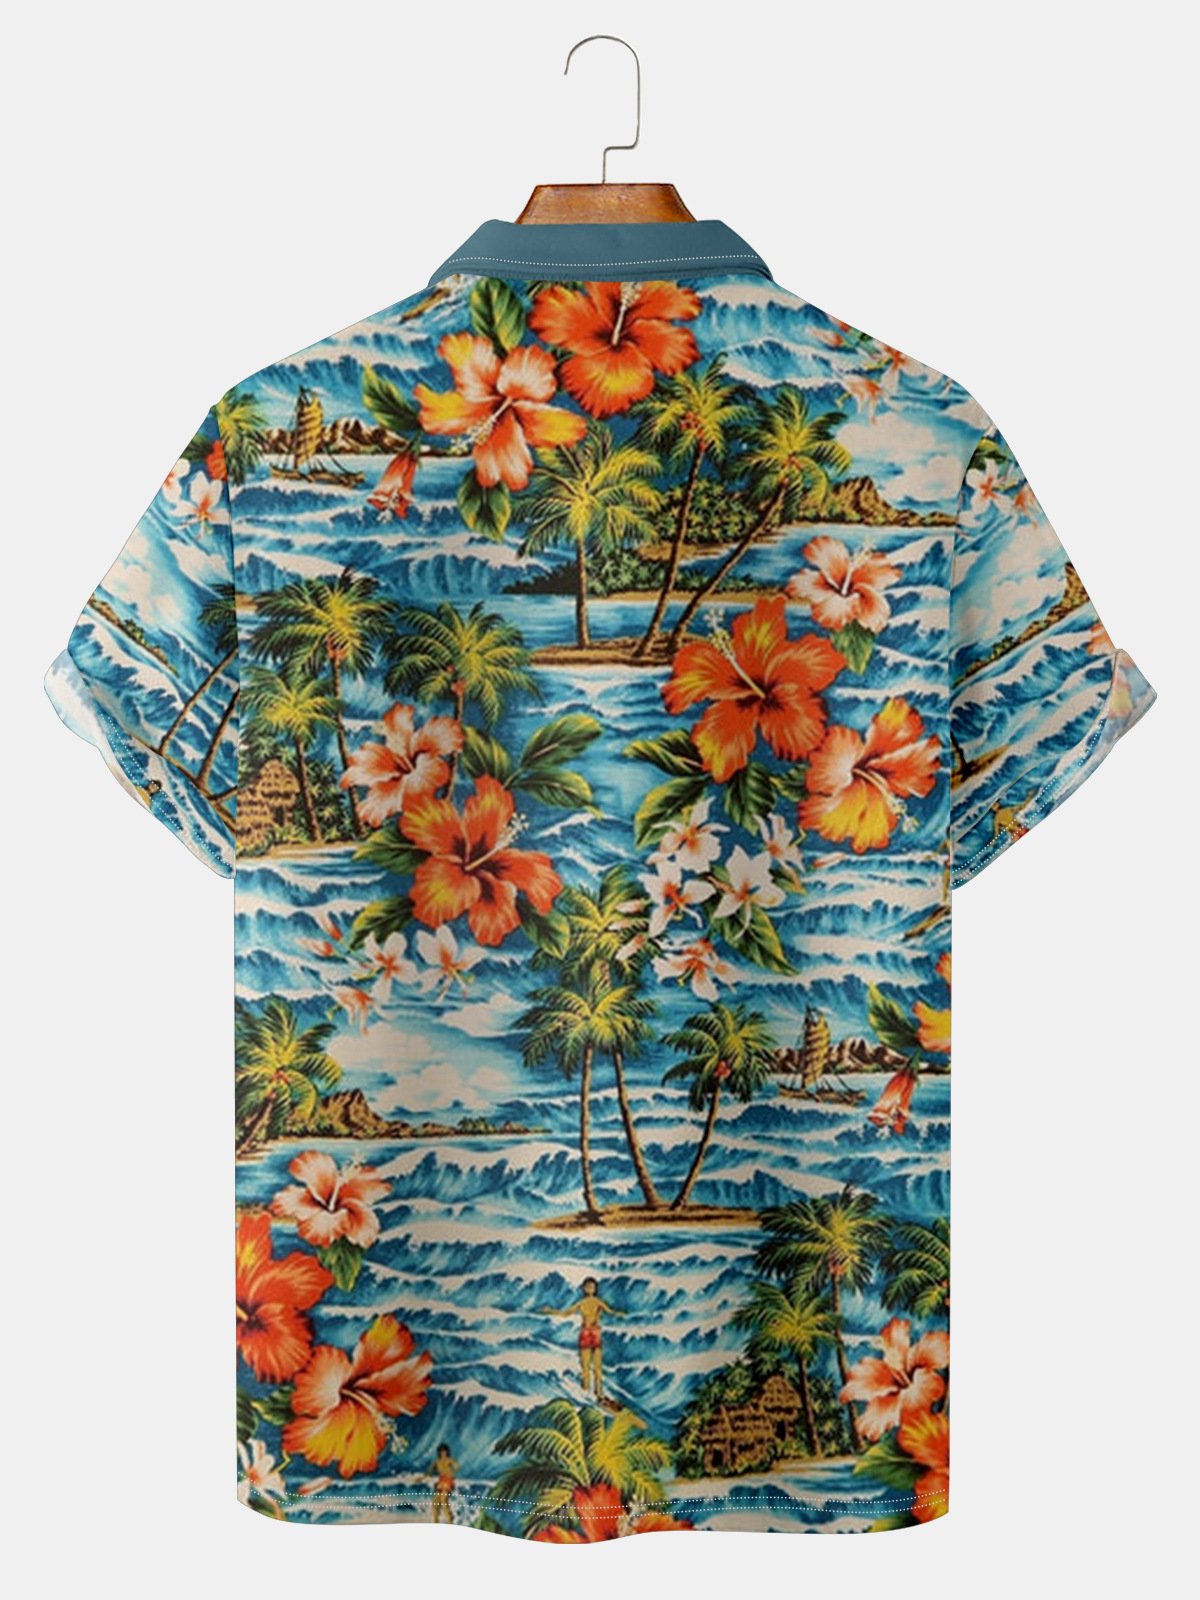 Resort Style Hawaiian Series Botanical And Floral Elements Pattern Lapel Short-Sleeved Polo Print Top